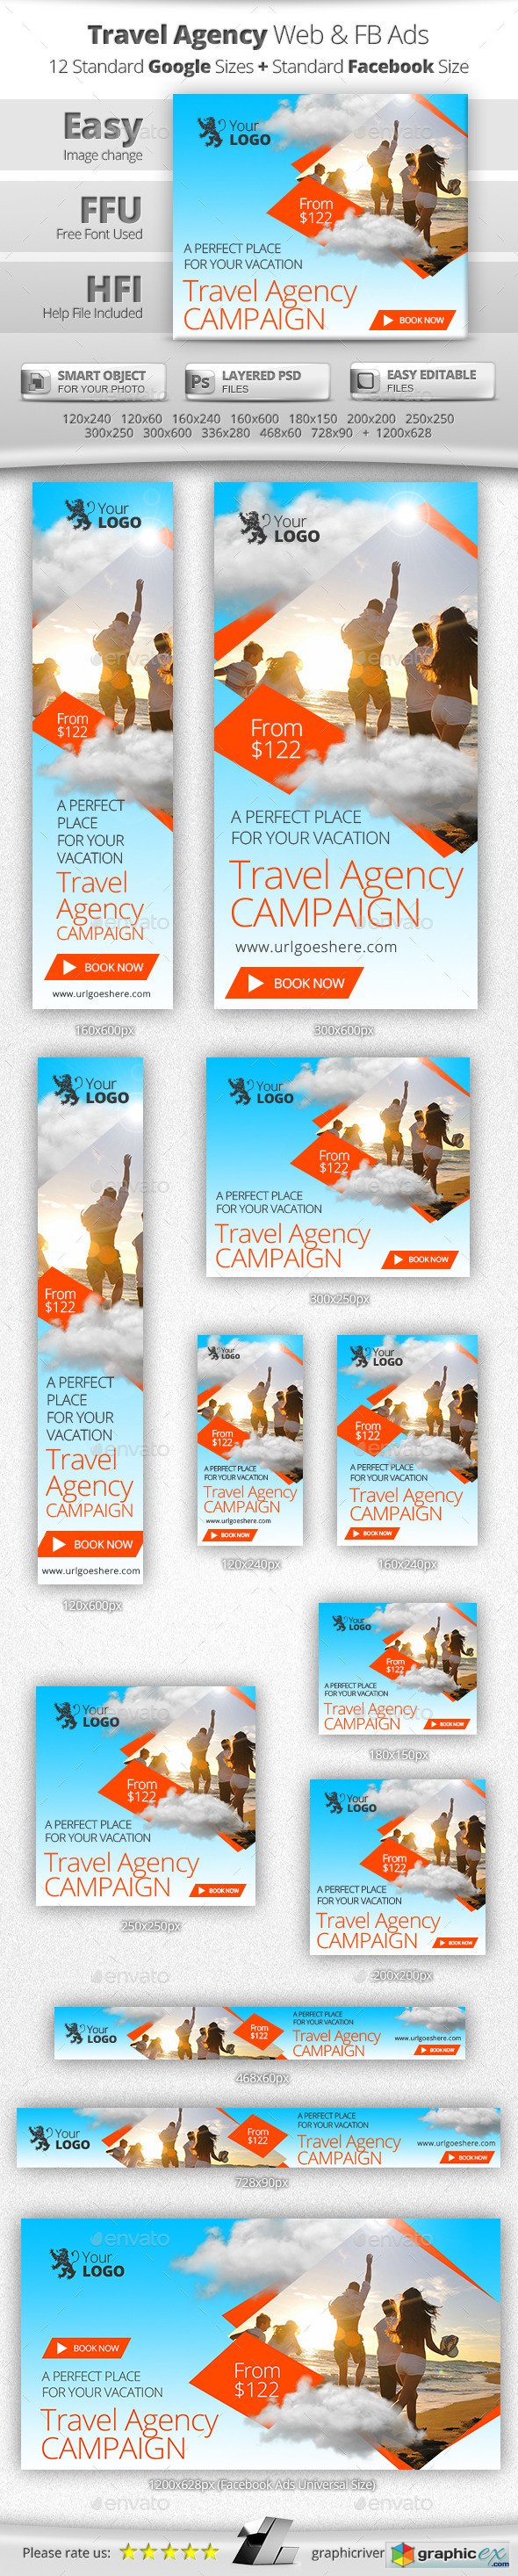 Travel Agency Web & Facebook Banners Ads